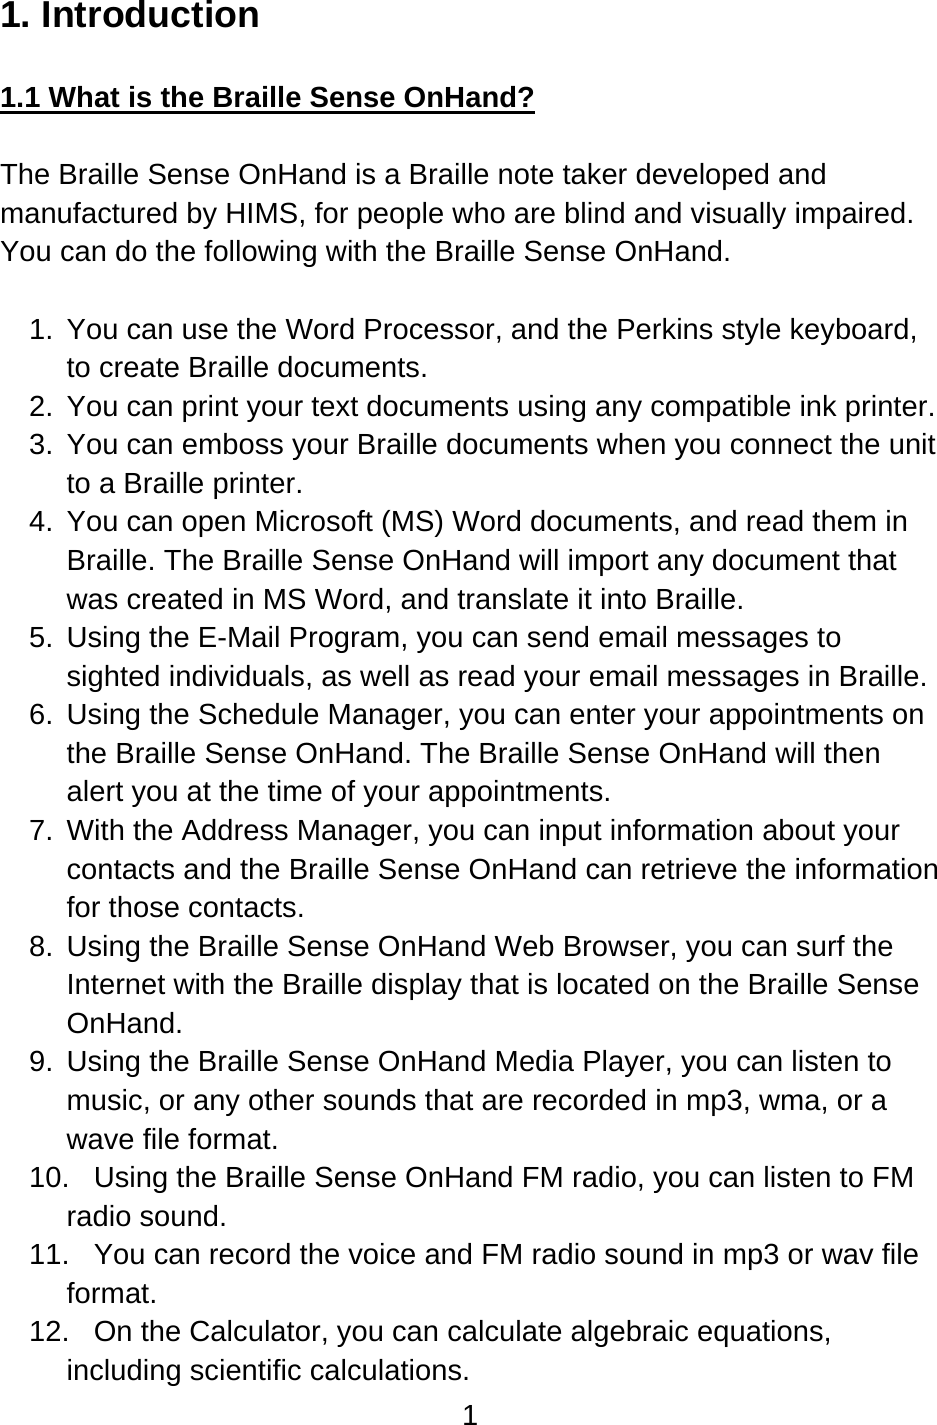 1  1. Introduction  1.1 What is the Braille Sense OnHand?  The Braille Sense OnHand is a Braille note taker developed and manufactured by HIMS, for people who are blind and visually impaired. You can do the following with the Braille Sense OnHand.  1.  You can use the Word Processor, and the Perkins style keyboard, to create Braille documents. 2.  You can print your text documents using any compatible ink printer. 3.  You can emboss your Braille documents when you connect the unit to a Braille printer. 4.  You can open Microsoft (MS) Word documents, and read them in Braille. The Braille Sense OnHand will import any document that was created in MS Word, and translate it into Braille. 5.  Using the E-Mail Program, you can send email messages to sighted individuals, as well as read your email messages in Braille. 6.  Using the Schedule Manager, you can enter your appointments on the Braille Sense OnHand. The Braille Sense OnHand will then alert you at the time of your appointments. 7.  With the Address Manager, you can input information about your contacts and the Braille Sense OnHand can retrieve the information for those contacts. 8.  Using the Braille Sense OnHand Web Browser, you can surf the Internet with the Braille display that is located on the Braille Sense OnHand. 9.  Using the Braille Sense OnHand Media Player, you can listen to music, or any other sounds that are recorded in mp3, wma, or a wave file format. 10.  Using the Braille Sense OnHand FM radio, you can listen to FM radio sound. 11.  You can record the voice and FM radio sound in mp3 or wav file format. 12.  On the Calculator, you can calculate algebraic equations, including scientific calculations. 